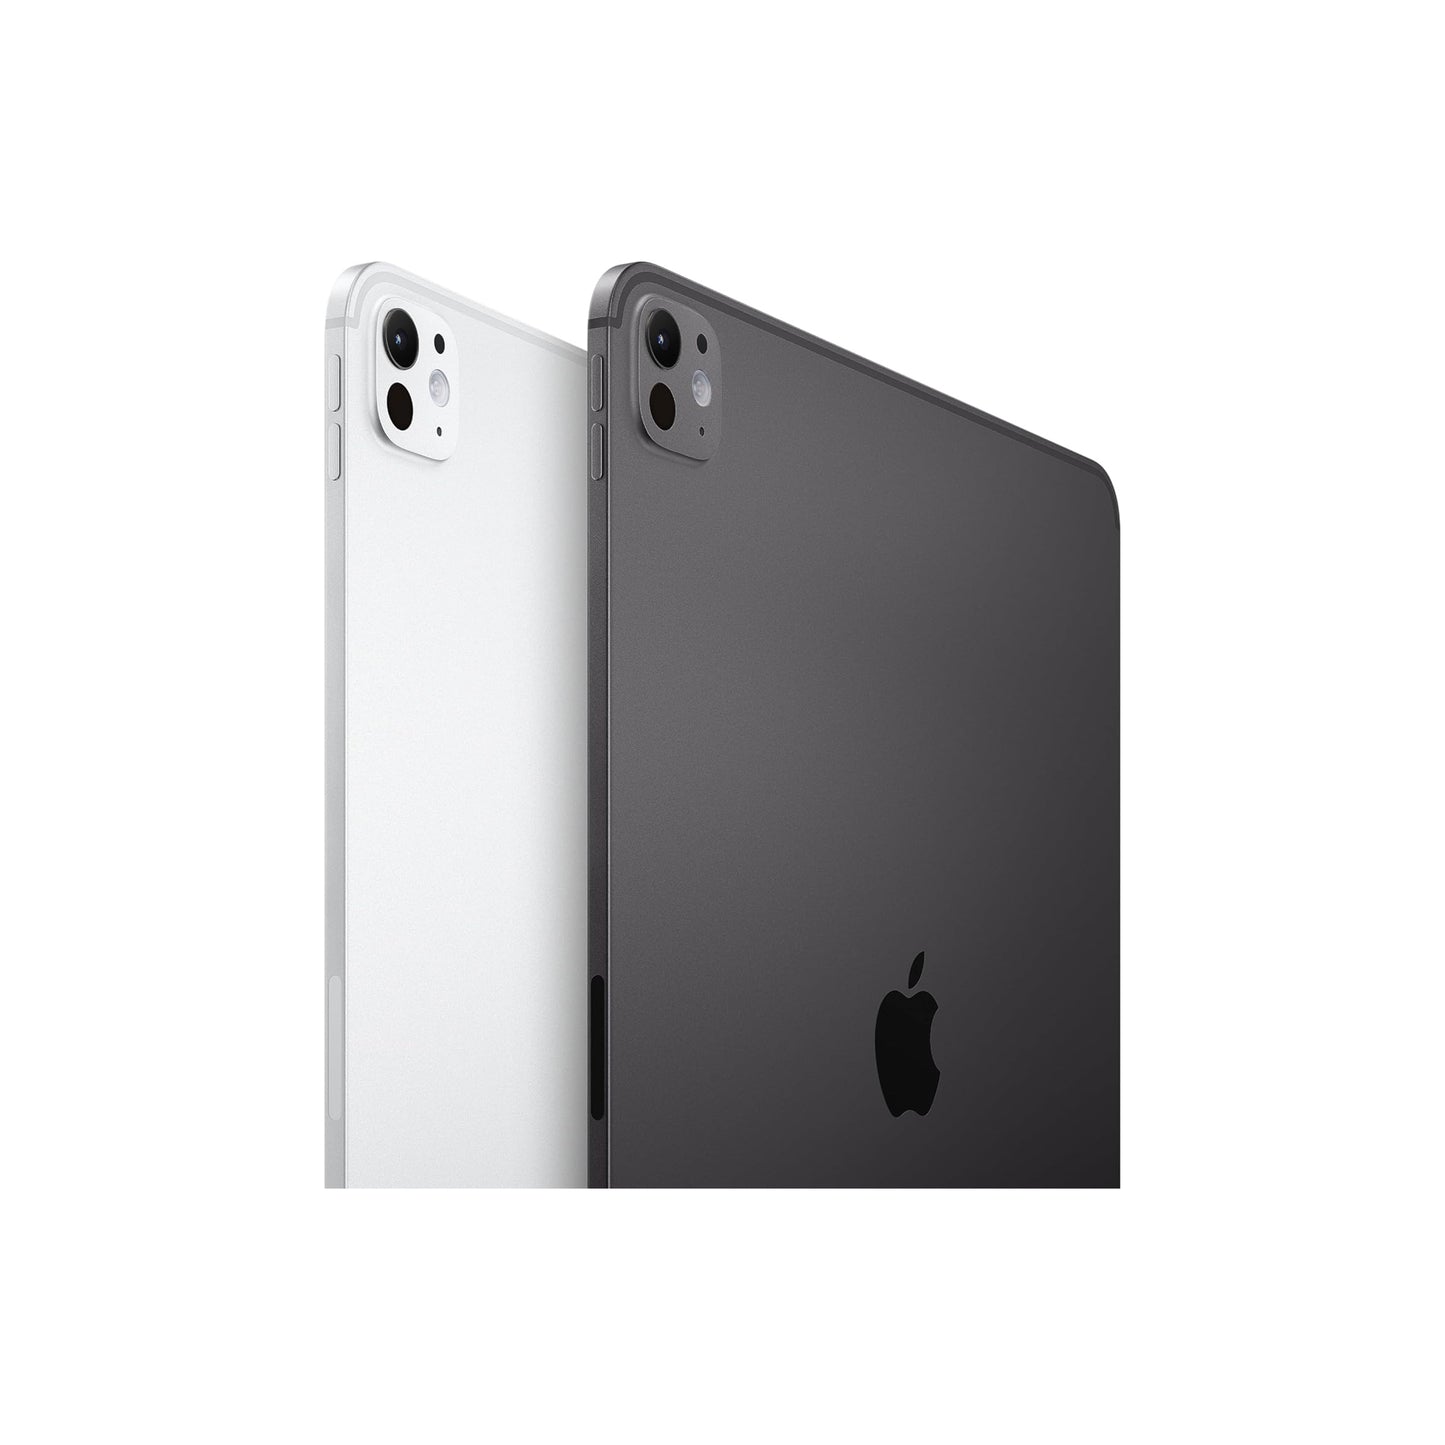 Apple iPad Pro 11-Inch (M4): Ultra Retina XDR Display - Nano-Texture Glass, 1TB, Landscape 12MP Front Camera/12MP Back Camera, LiDAR Scanner, Wi-Fi 6E + 5G Cellular with eSIM, Face ID — Space Black